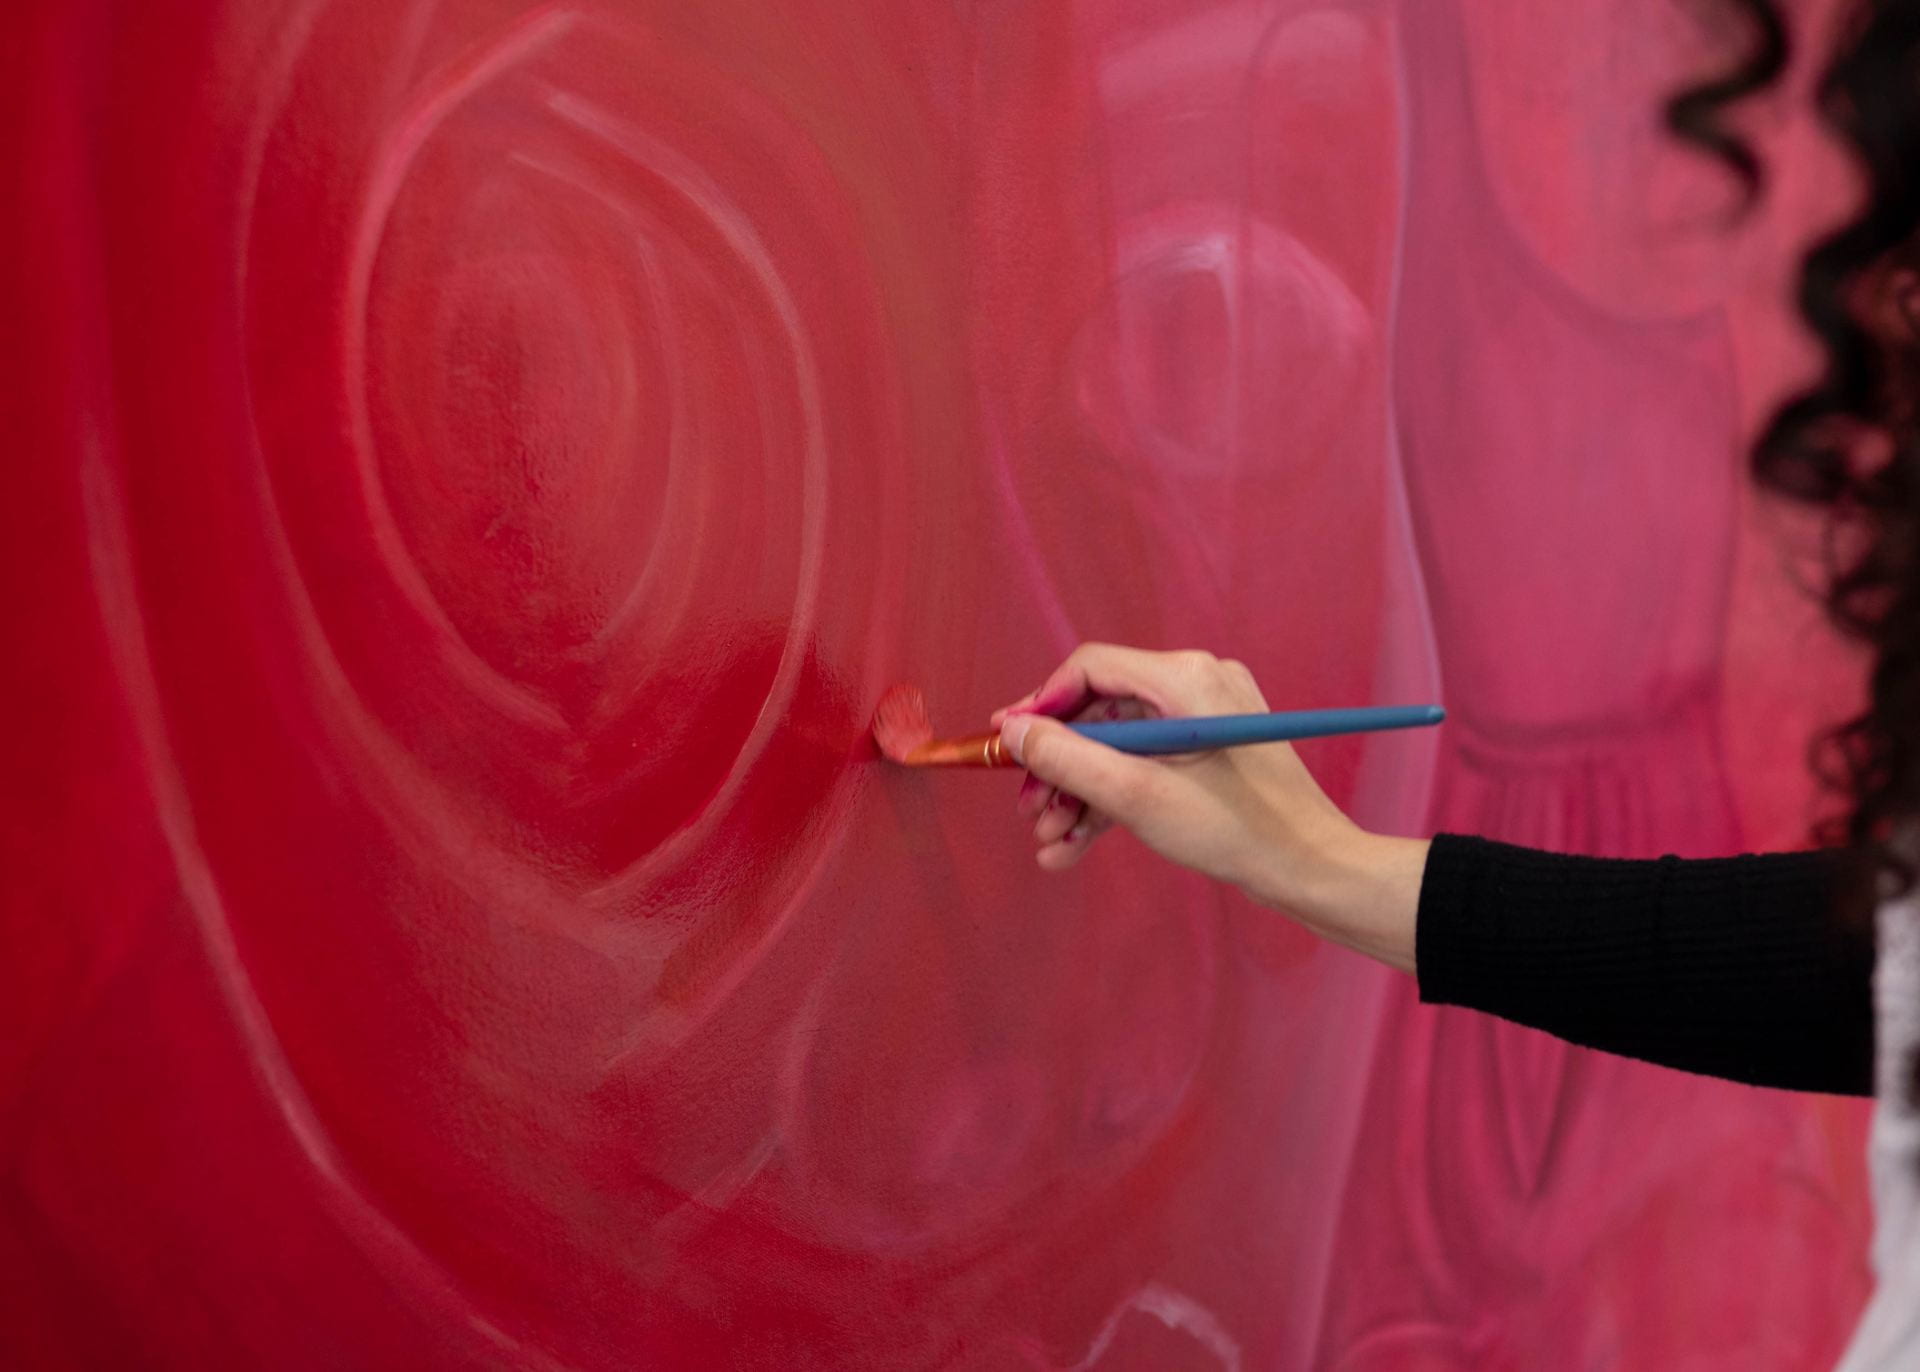  a hand holding a paintbrush reaching towards a red painting.